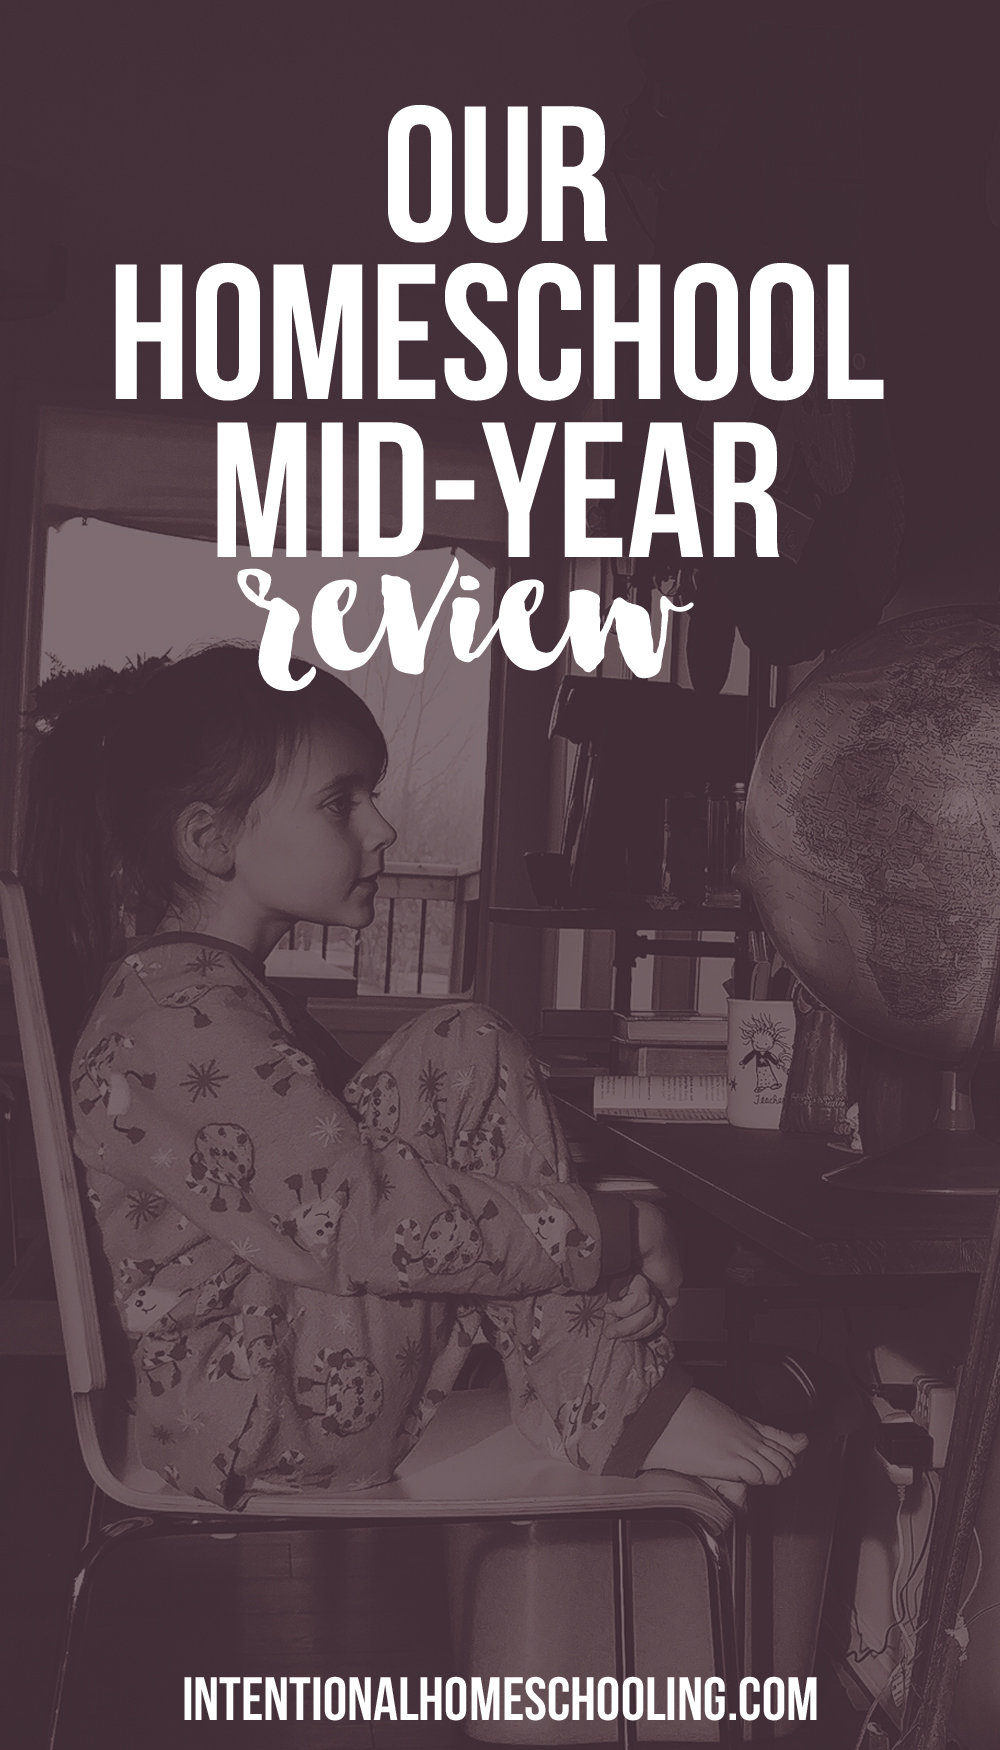 Our homeschool mid-year review - what is and isn't working!